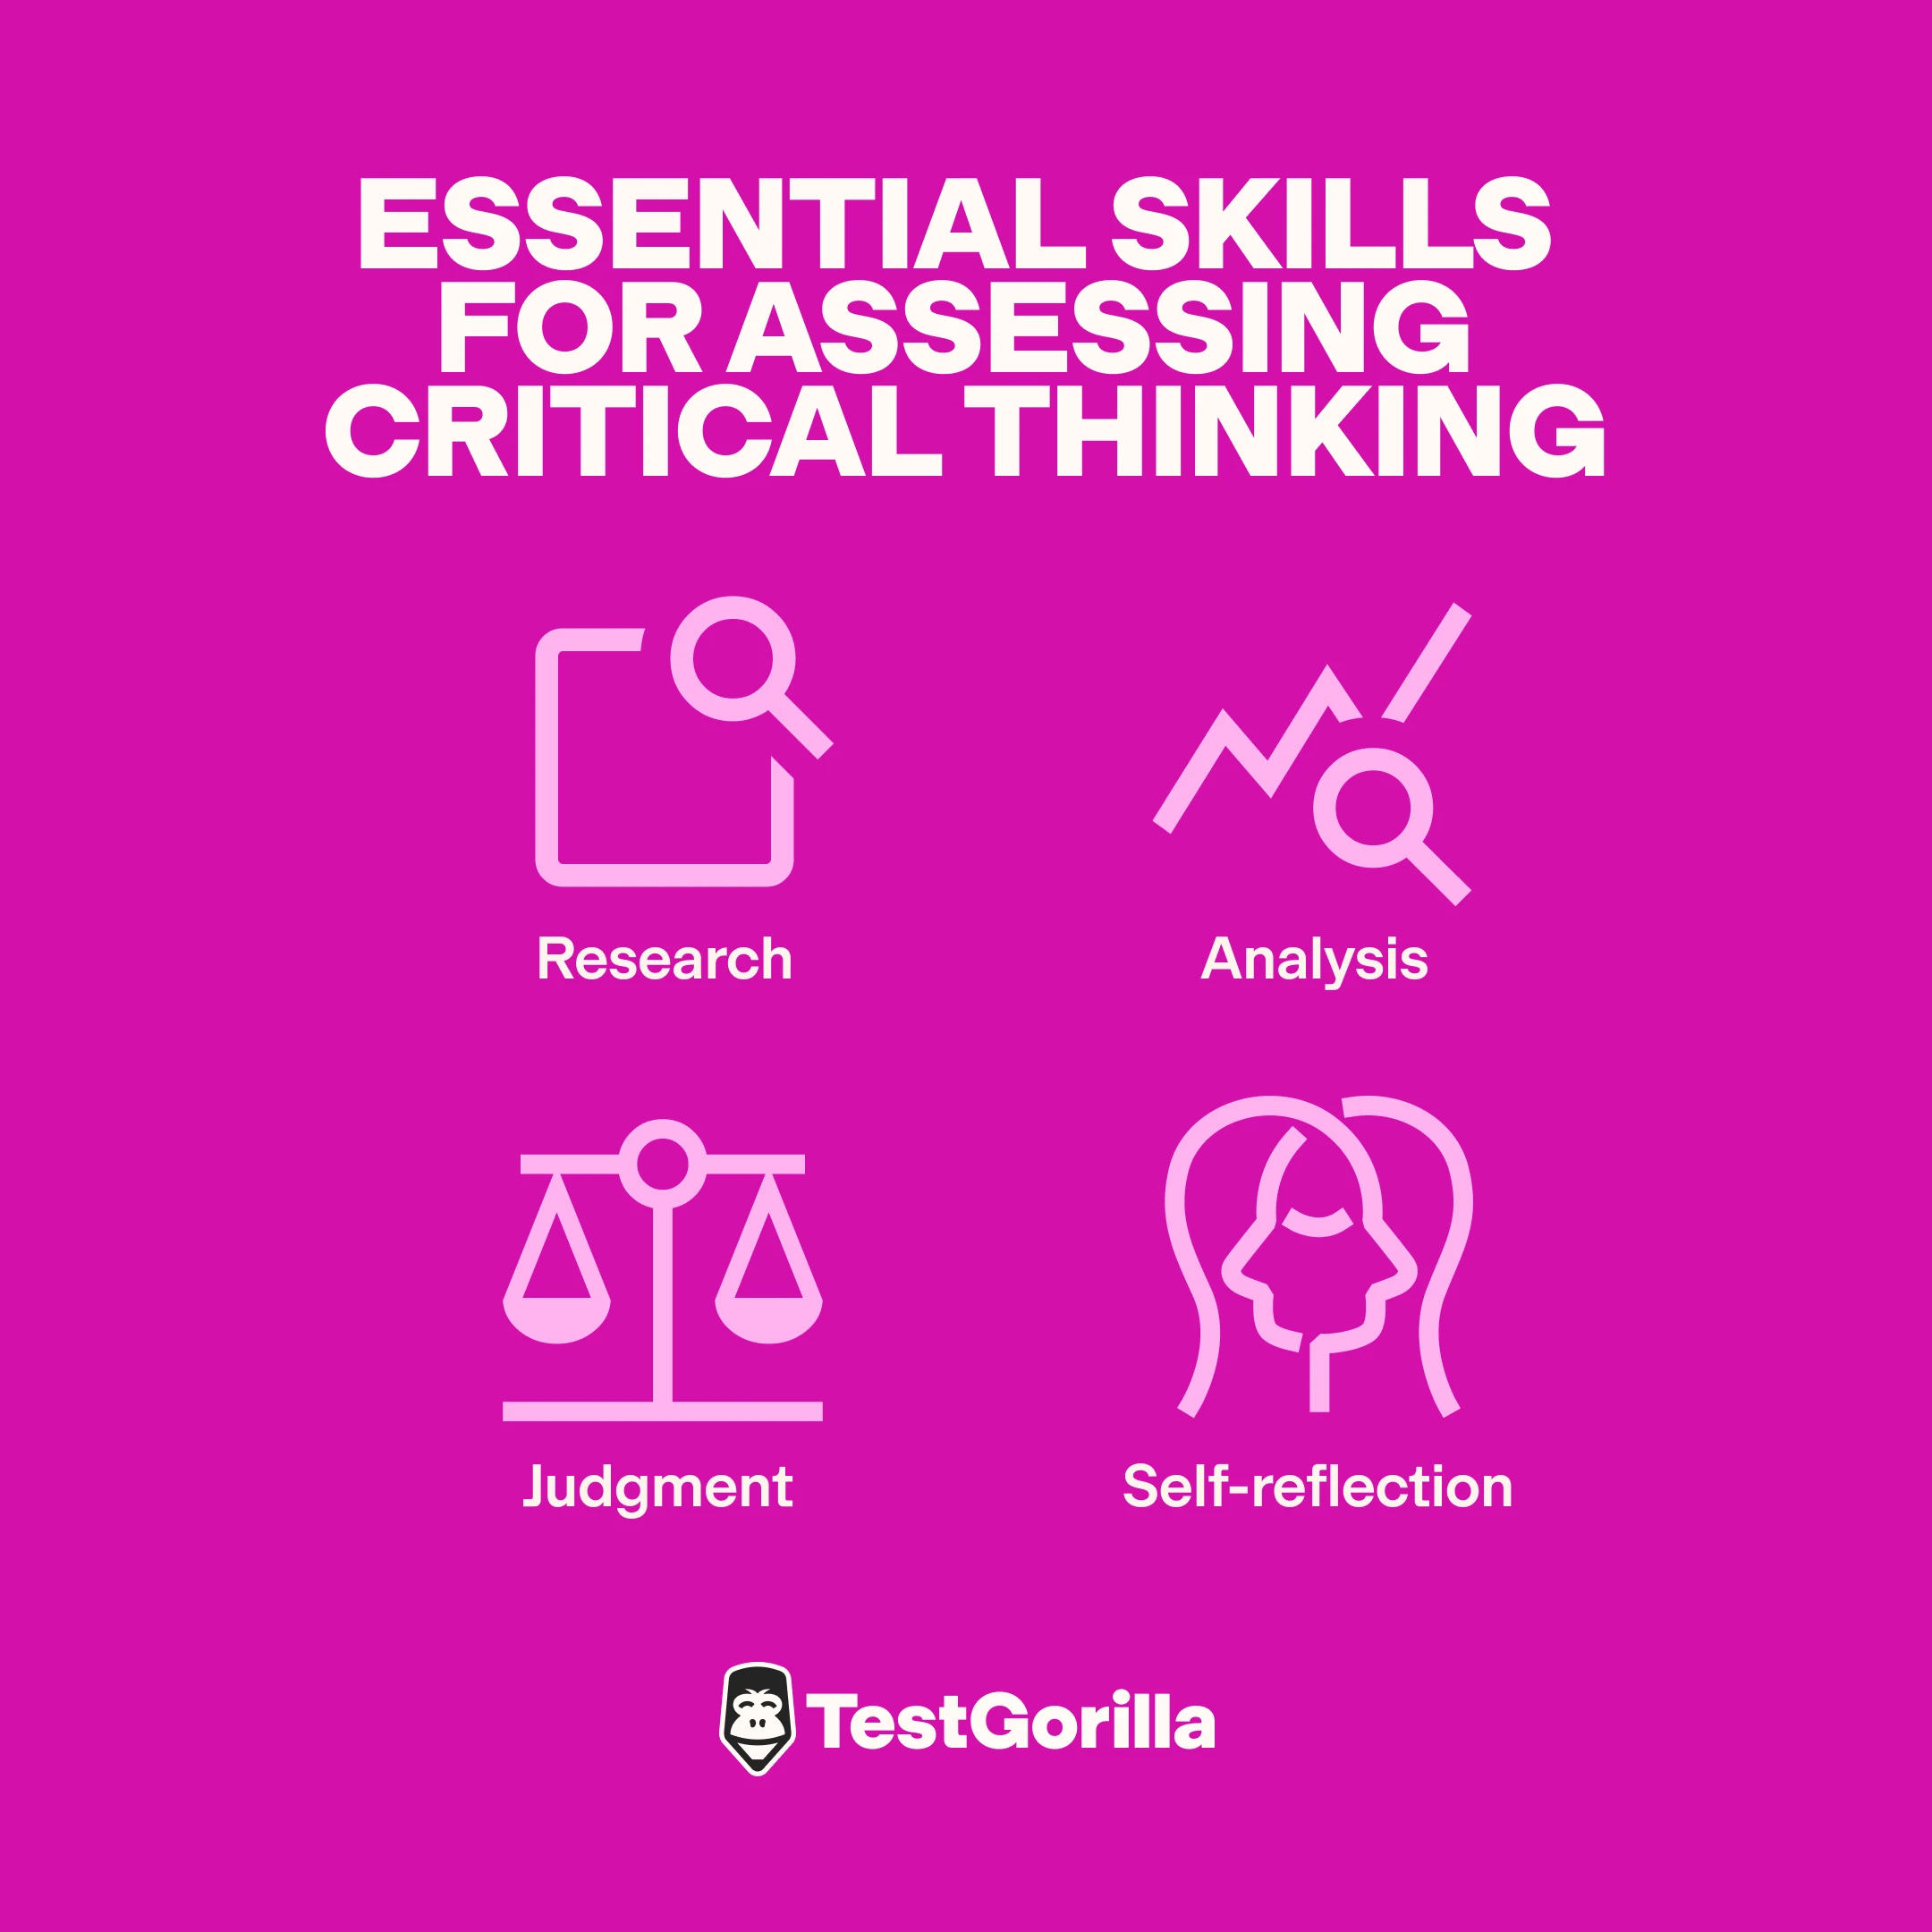 sub-skills for assessing critical thinking